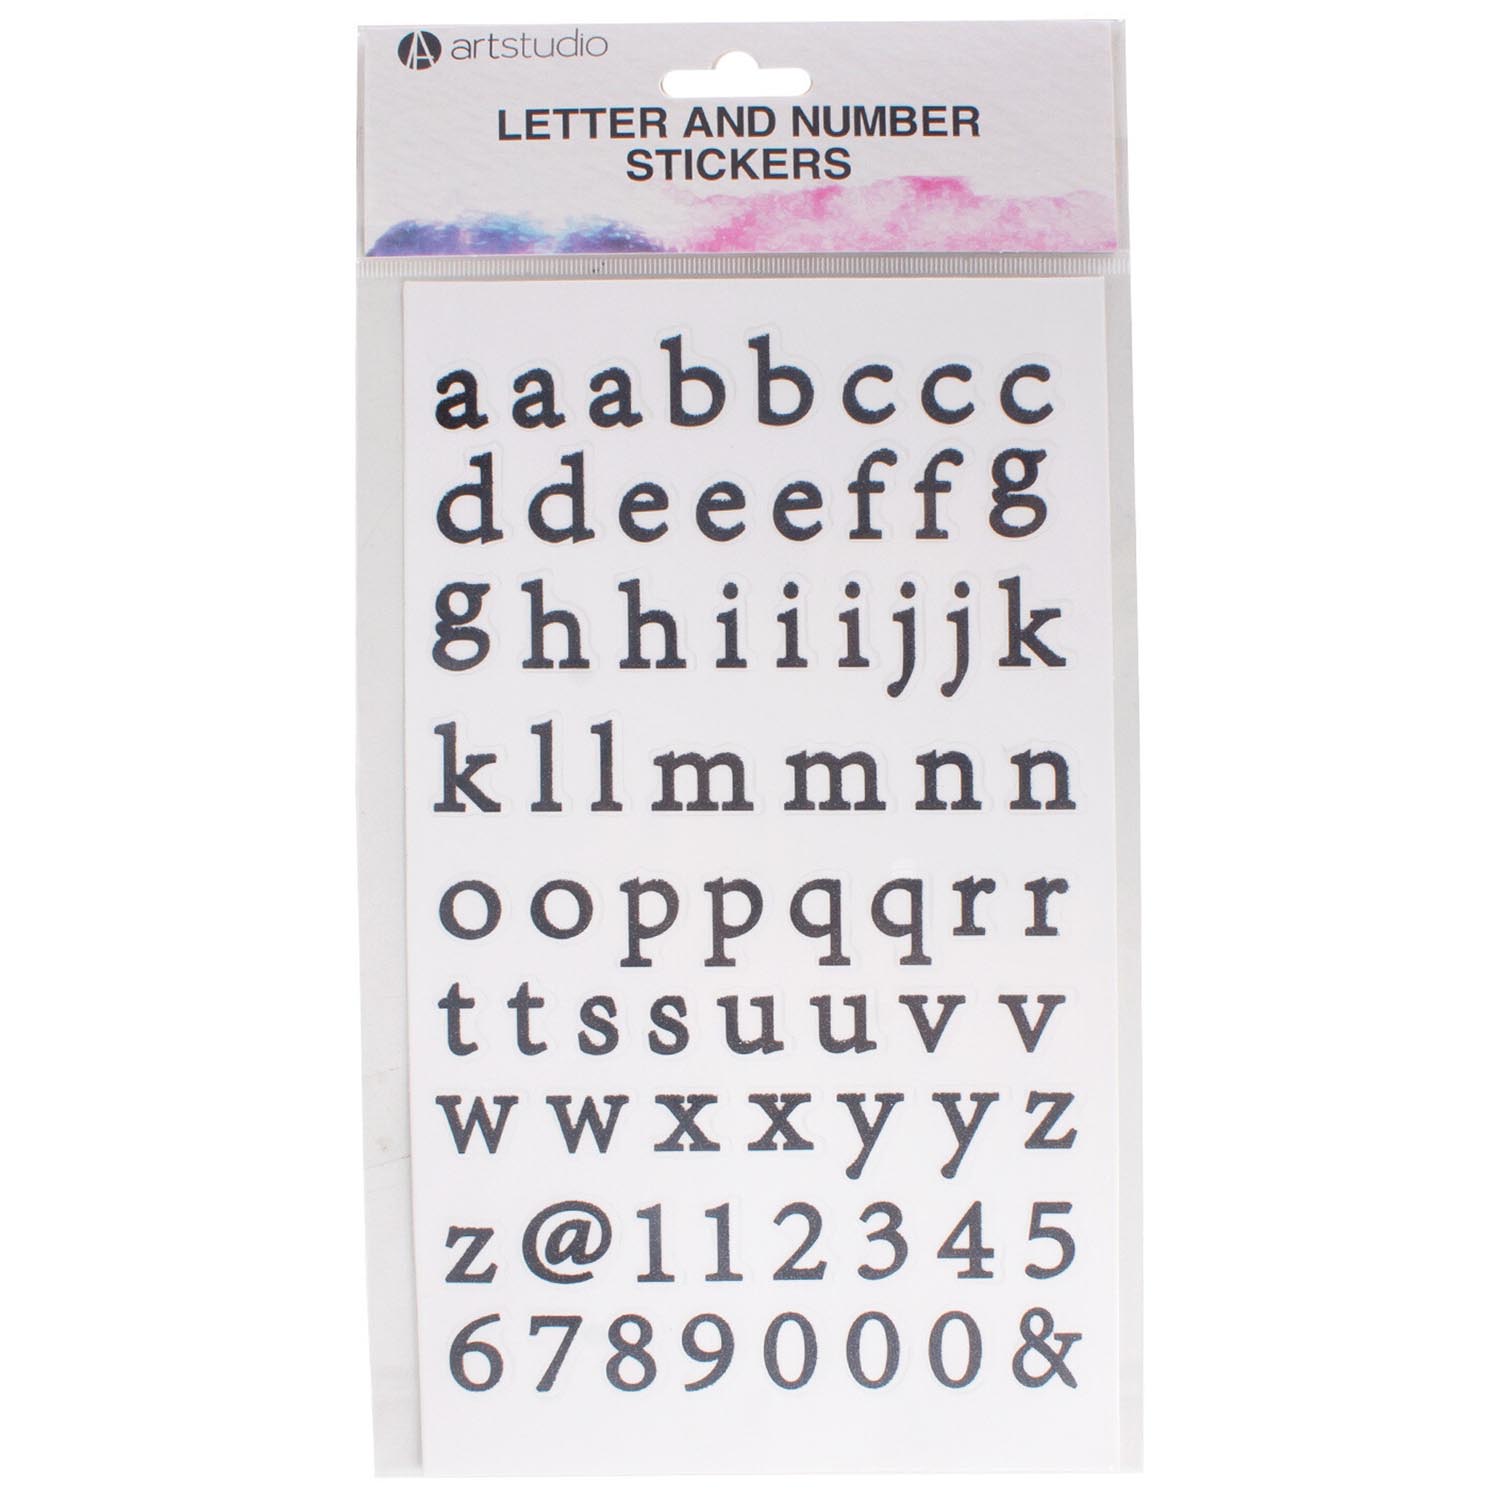 Art Studio Letter and Number Stickers Image